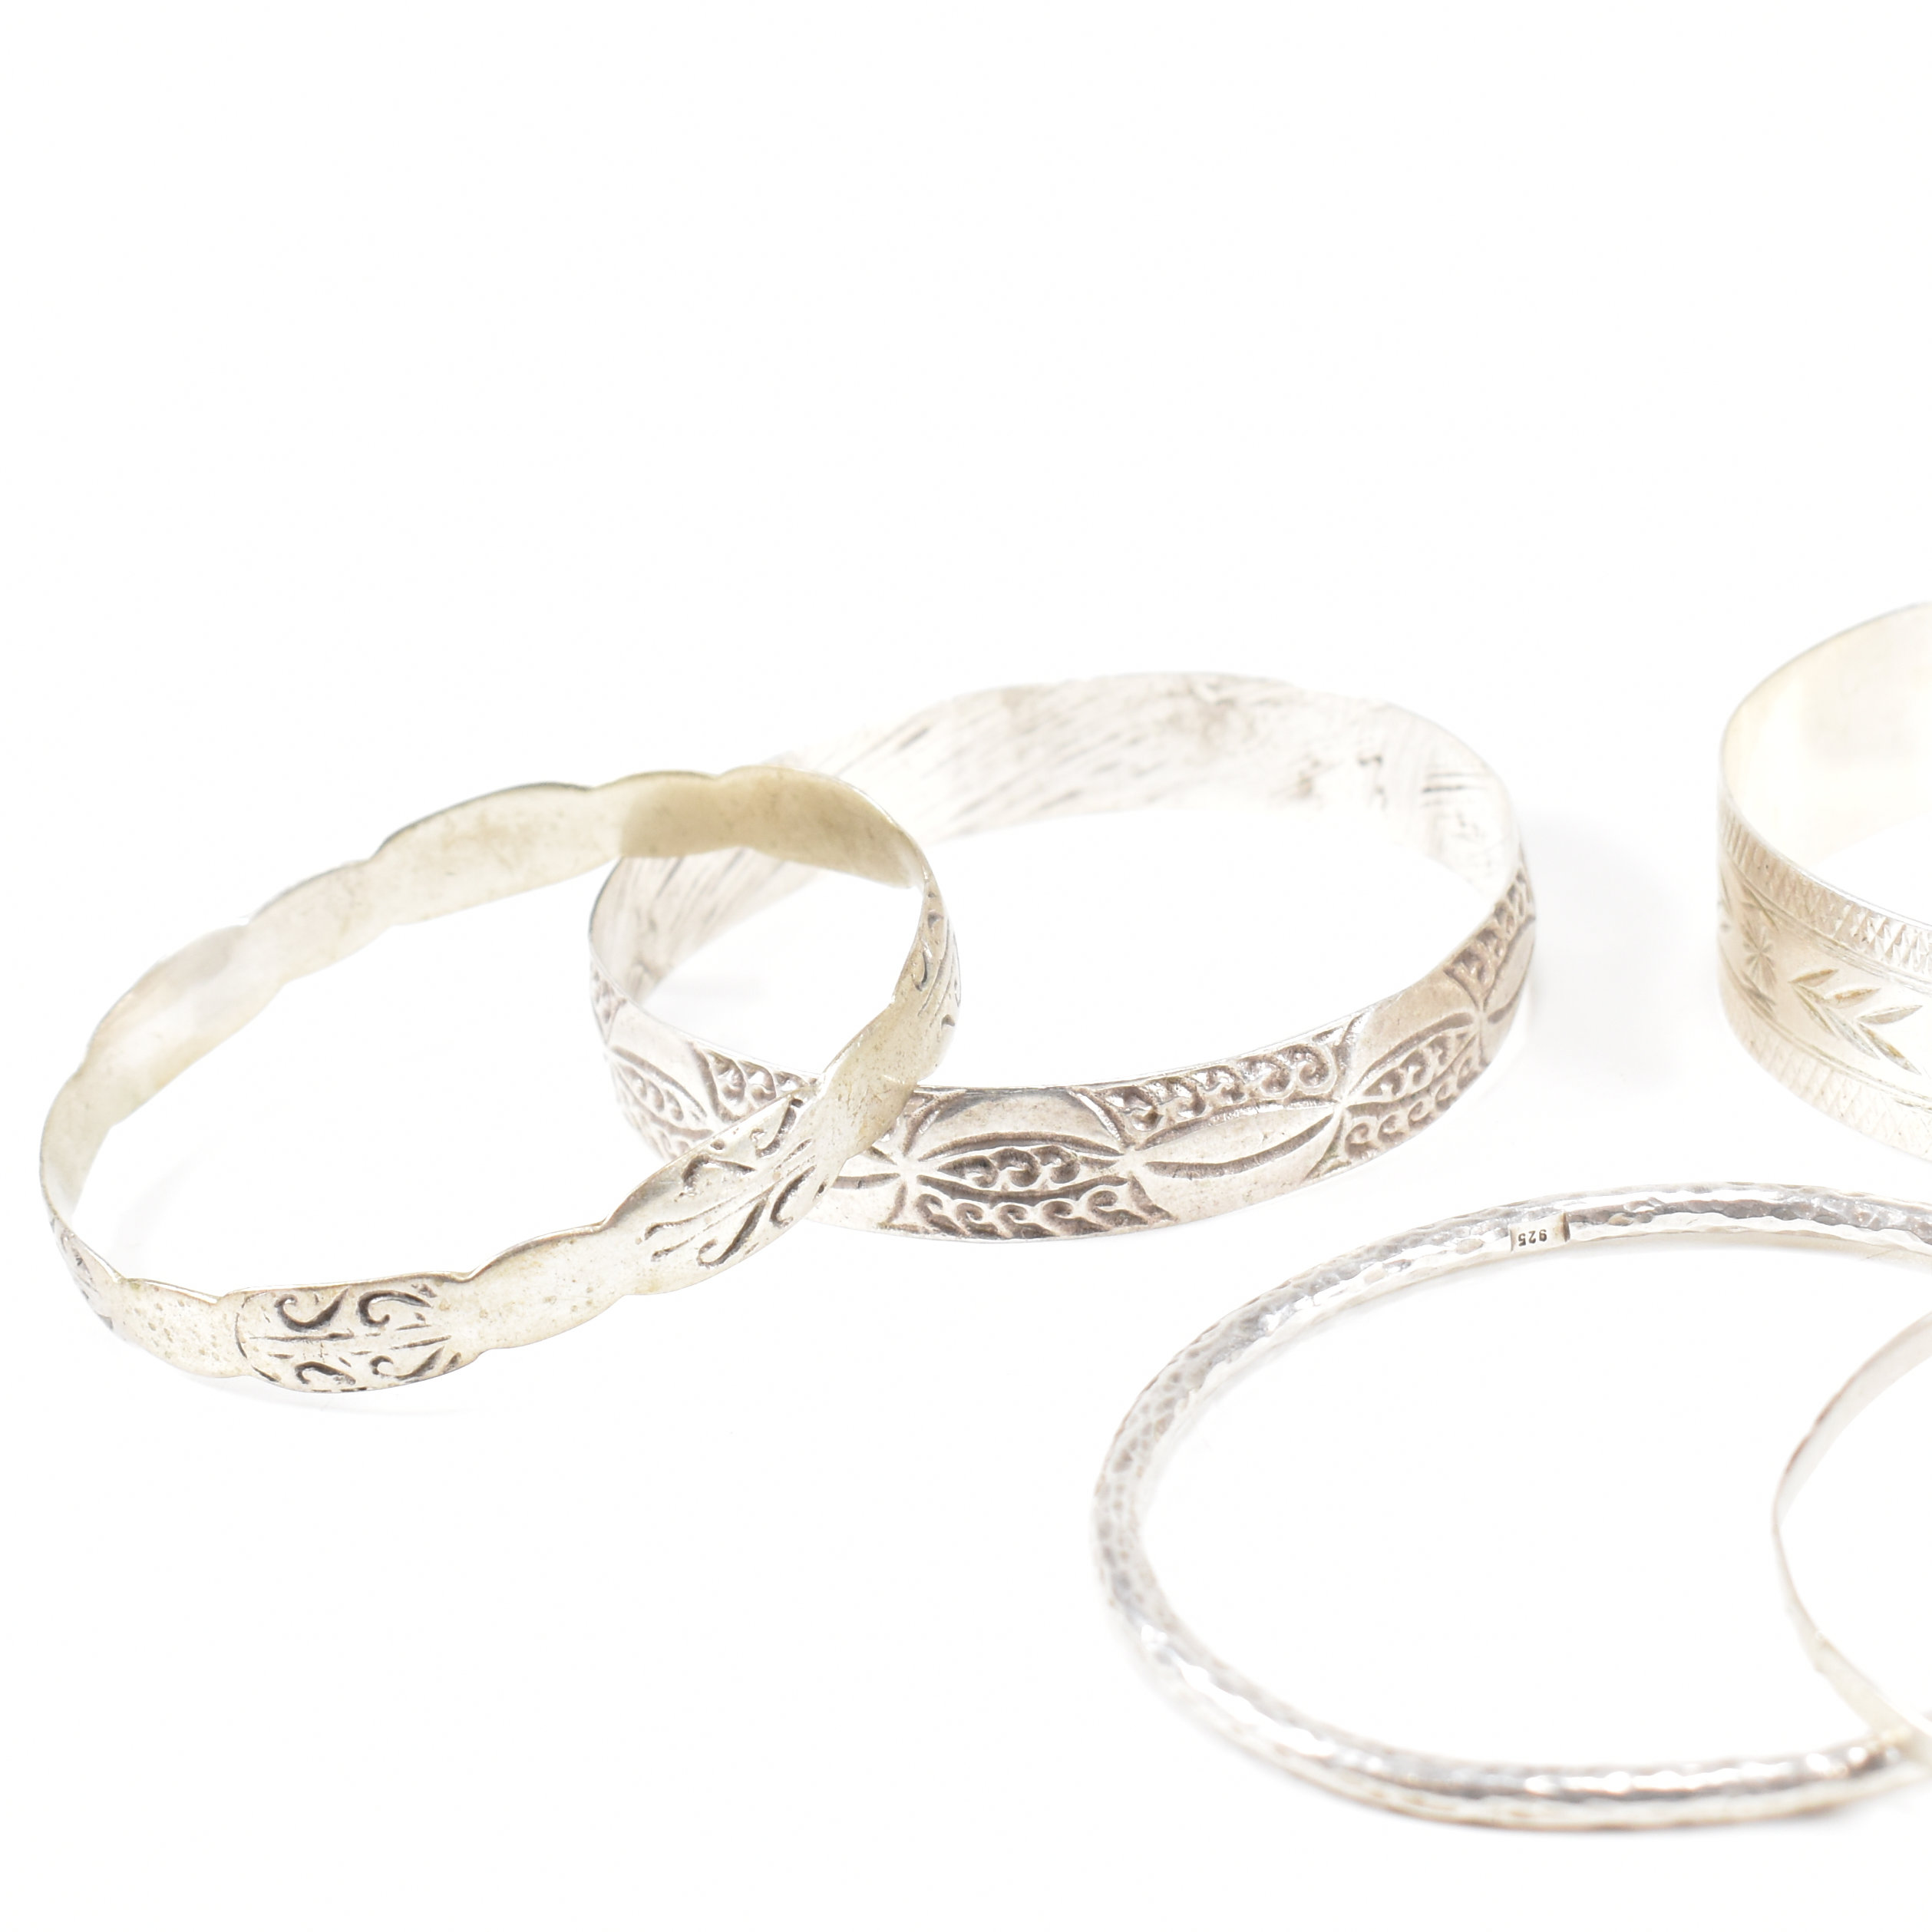 COLLECTION OF 5 925 SILVER & WHITE METAL BANGLES - Image 5 of 8